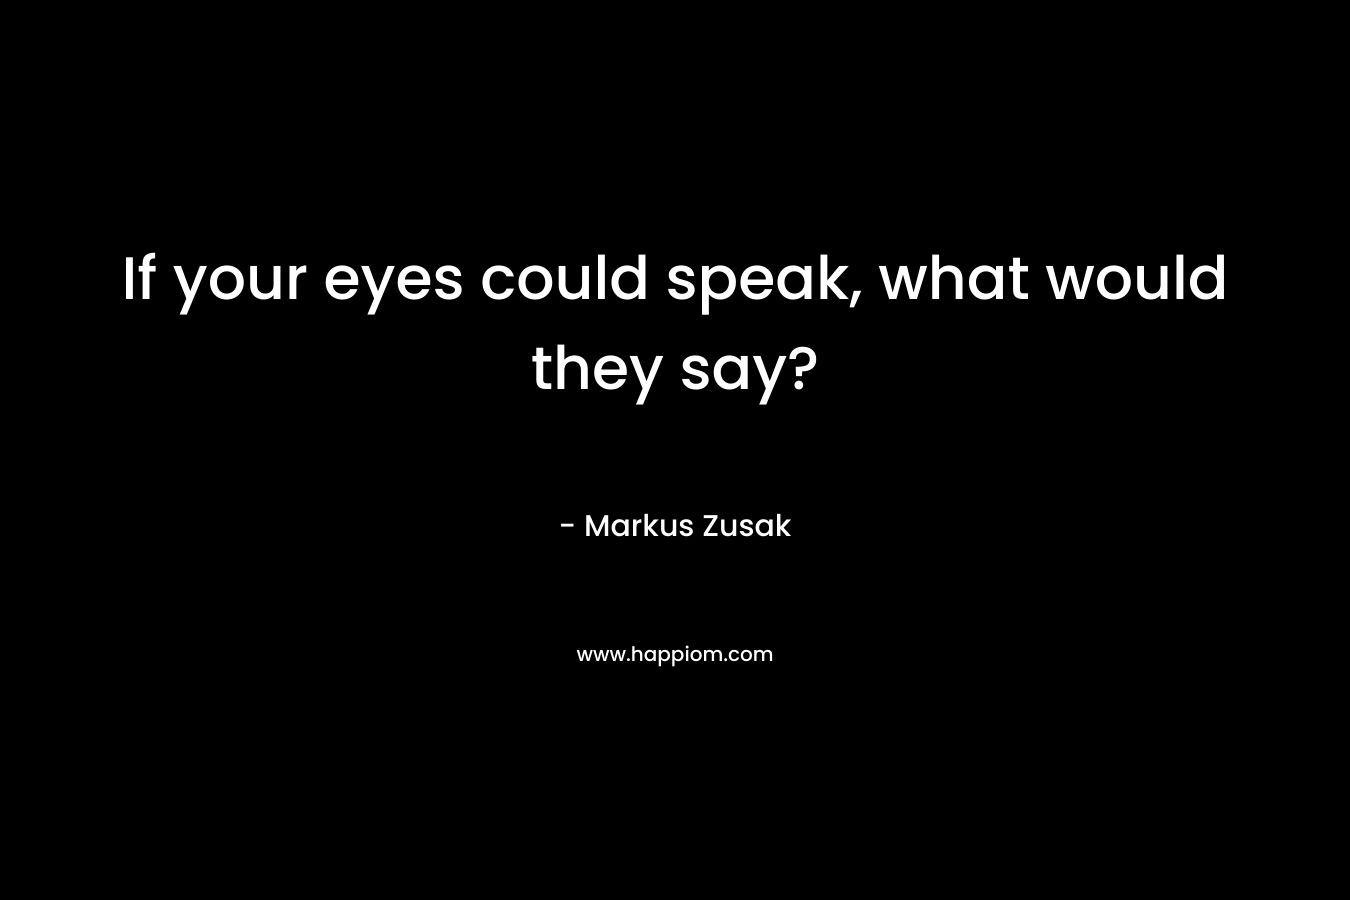 If your eyes could speak, what would they say?